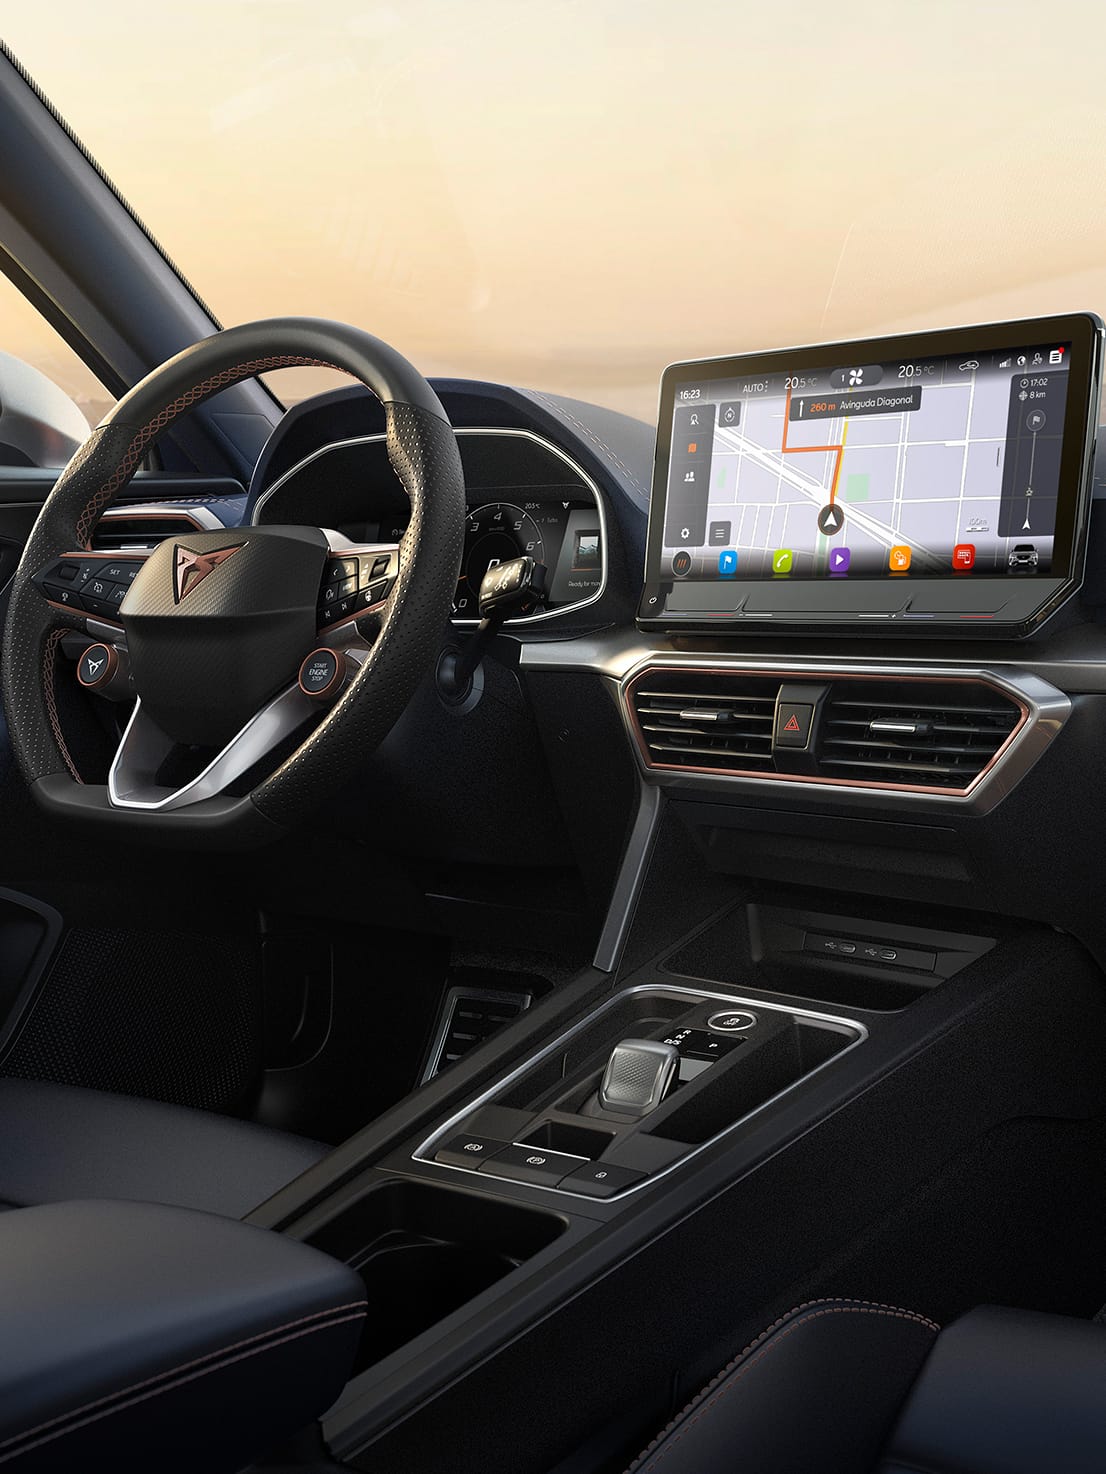 cupra connect voice control infotainment system with real-time traffic updates 